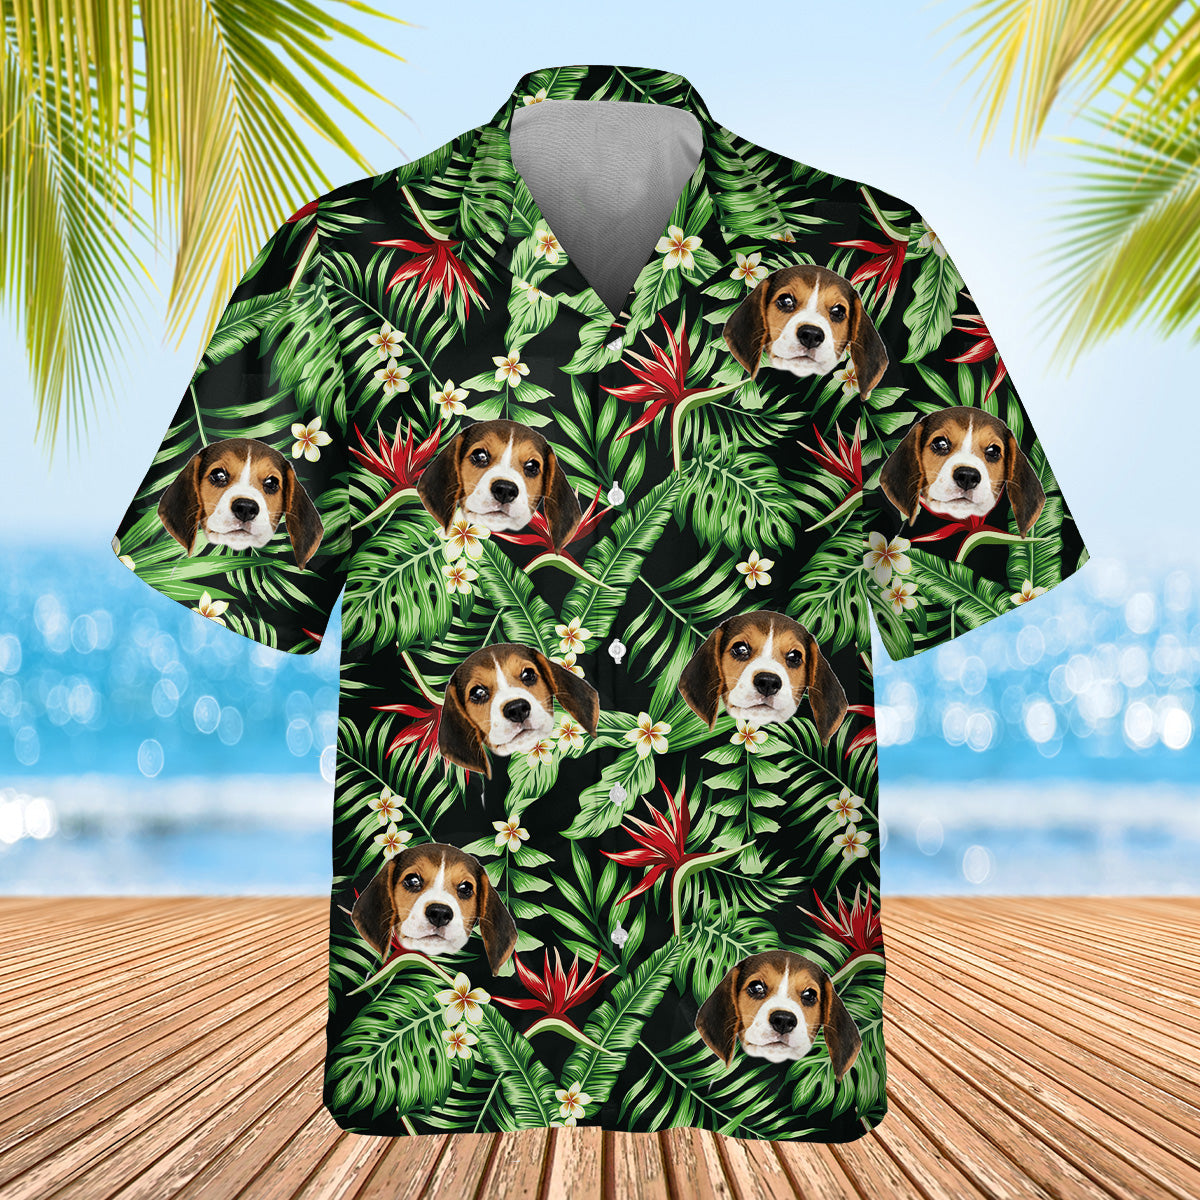 black leaf themed shirt with dogs